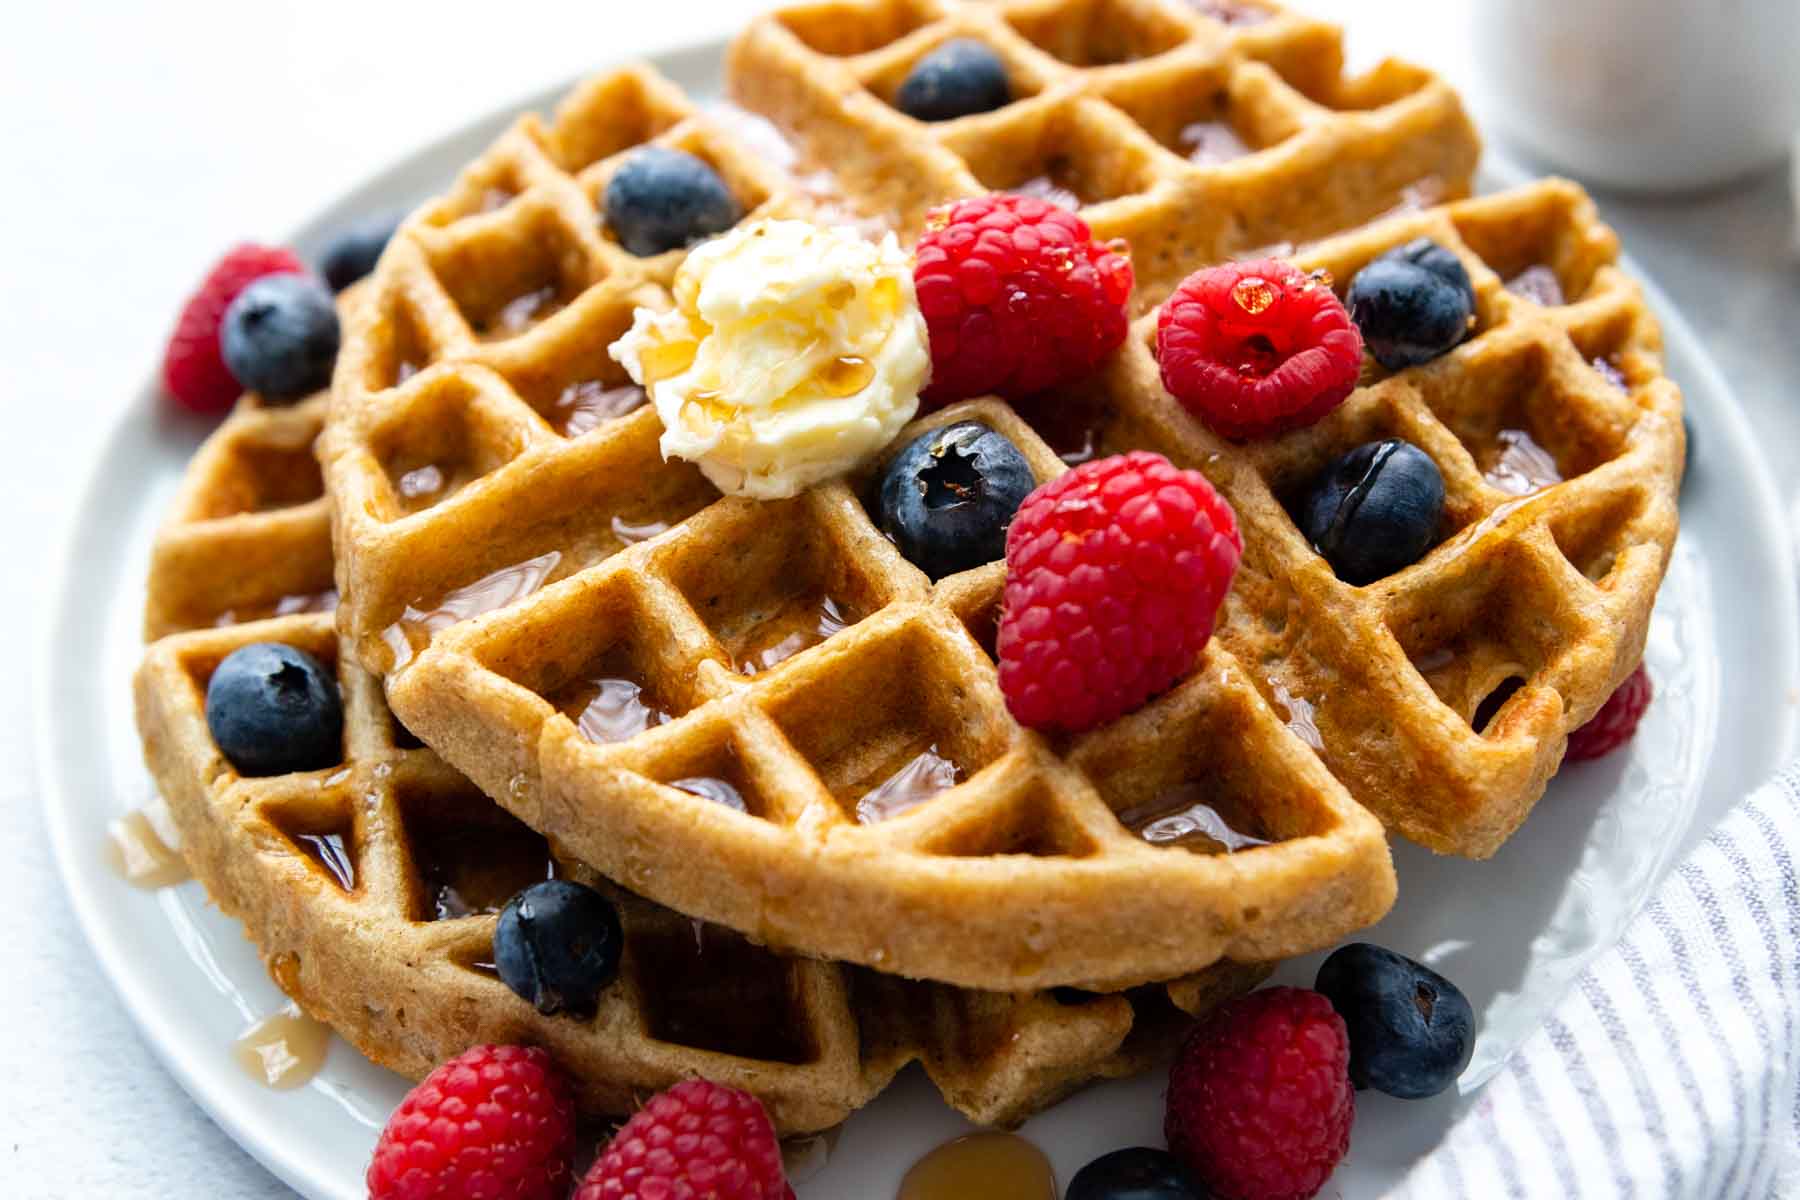 a stack of waffles on a white plate with berries, butter and syrup.